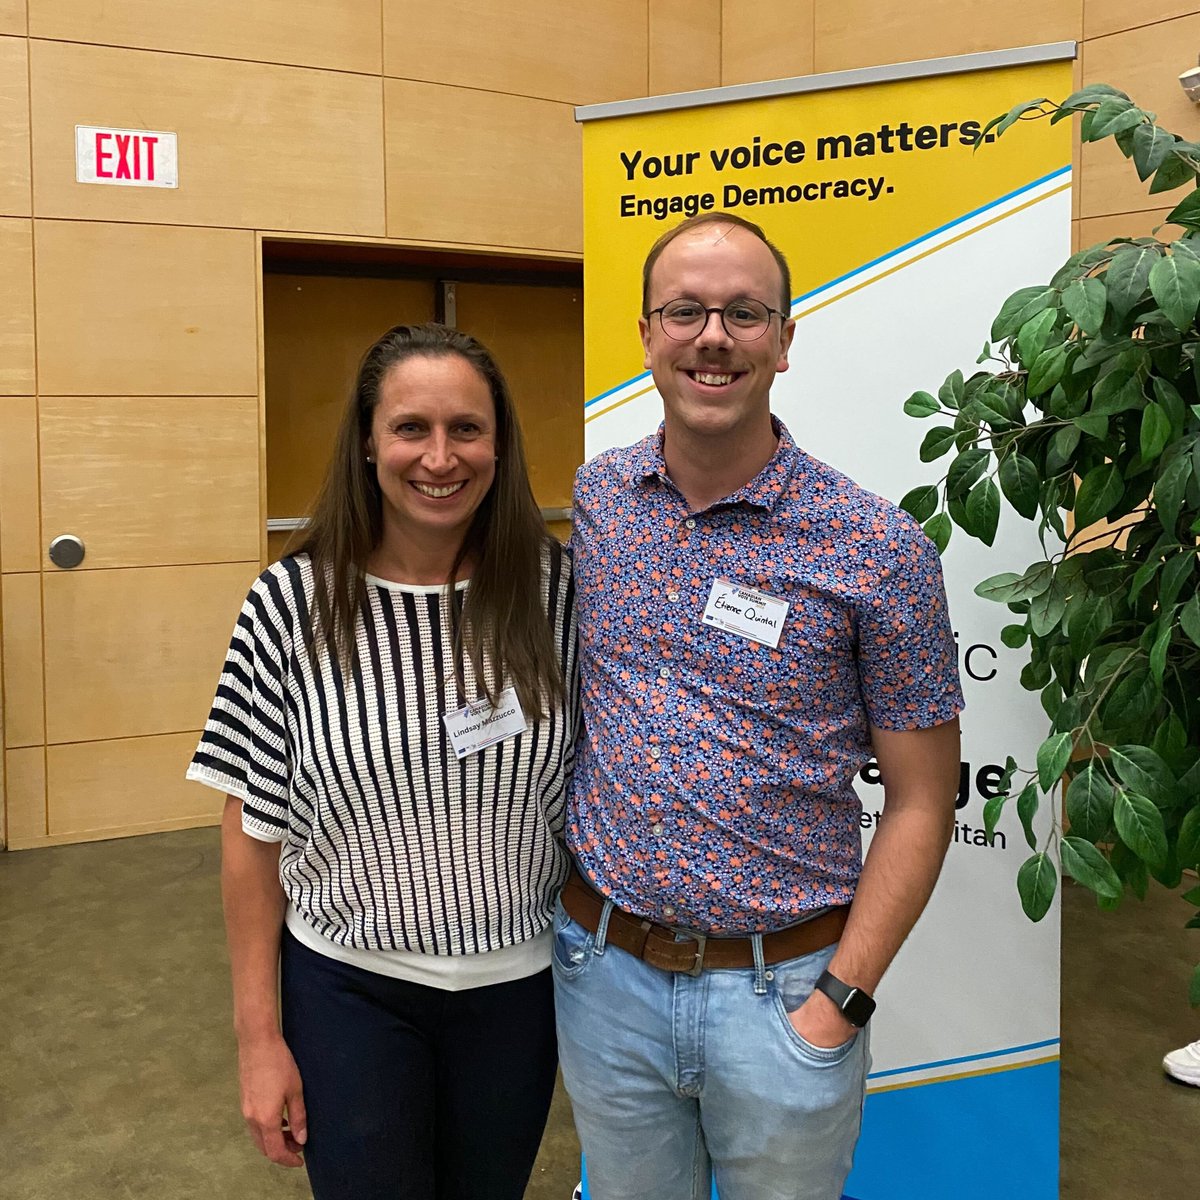 Members of the CIVIX Team attended #CdnVoteSummit organized by @TheExchange_TMU 📷

The team enjoyed connecting with innovative community leaders and other organizations on the frontlines of democracy.